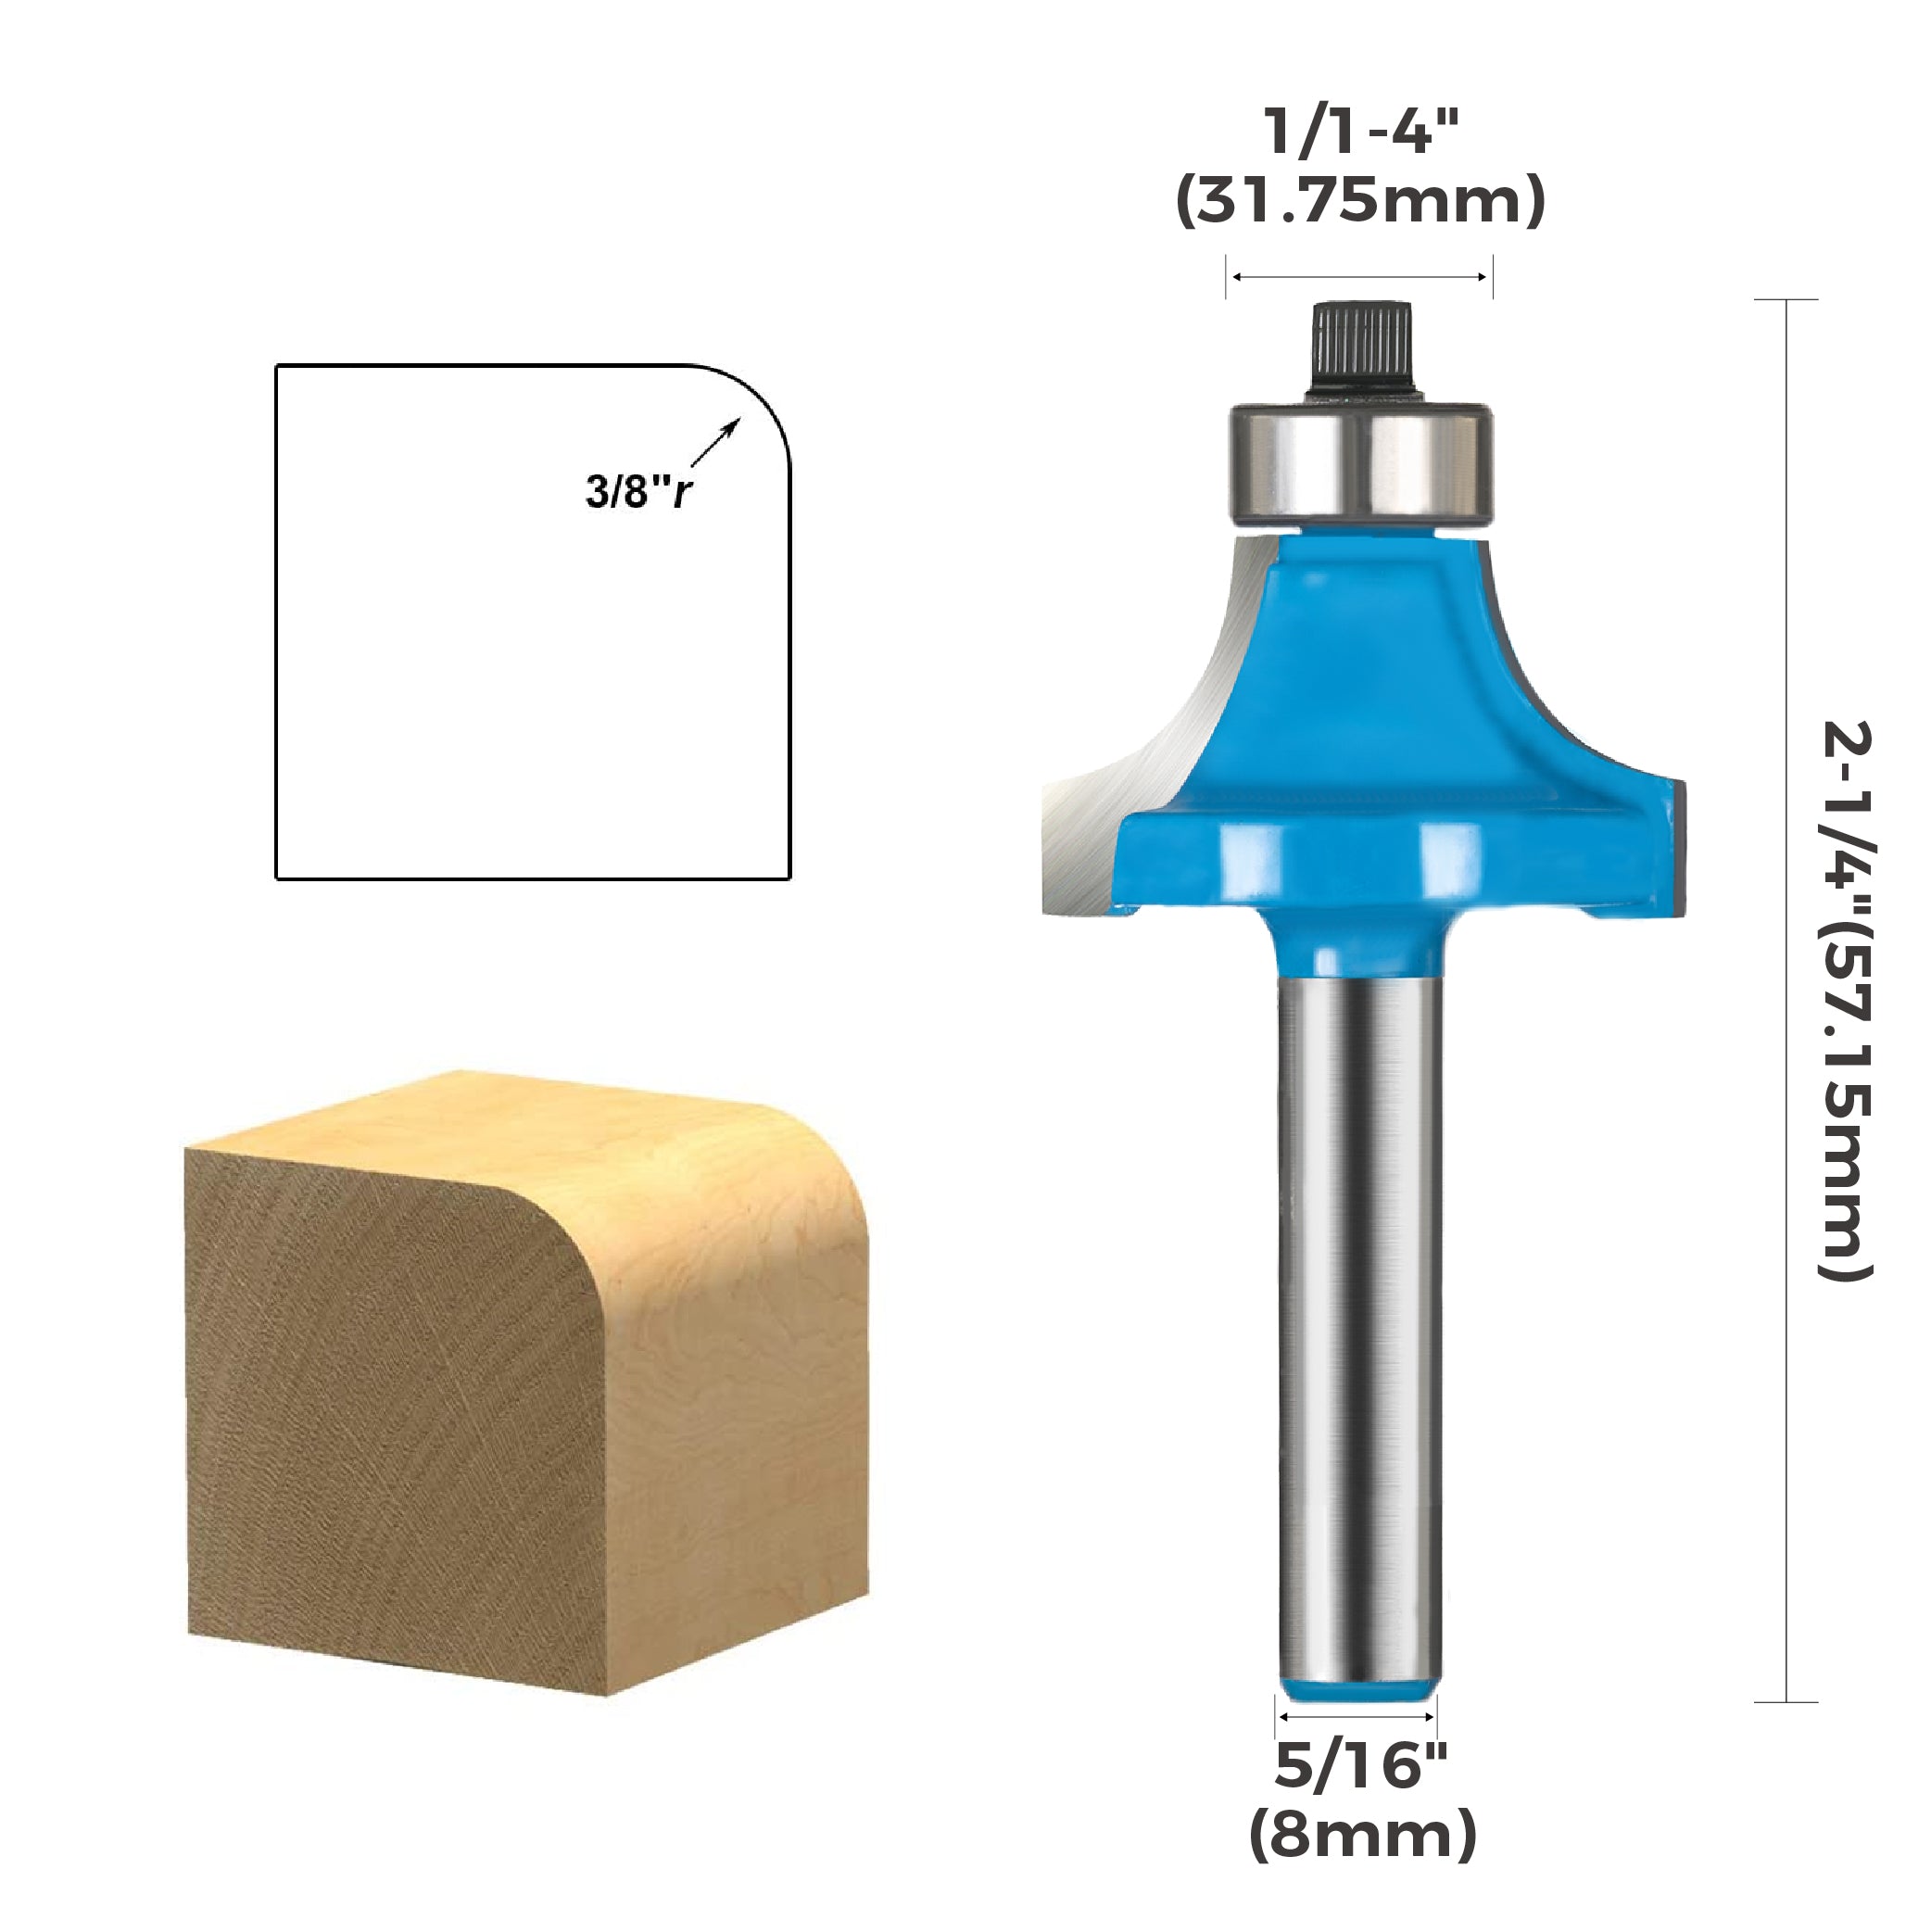 toolant Round Over Router Bits for Edge Forming, 5/16-Inch Shank 3/8-Inch Radius, Carbide-Tipped Milling Cutter for Woodworking